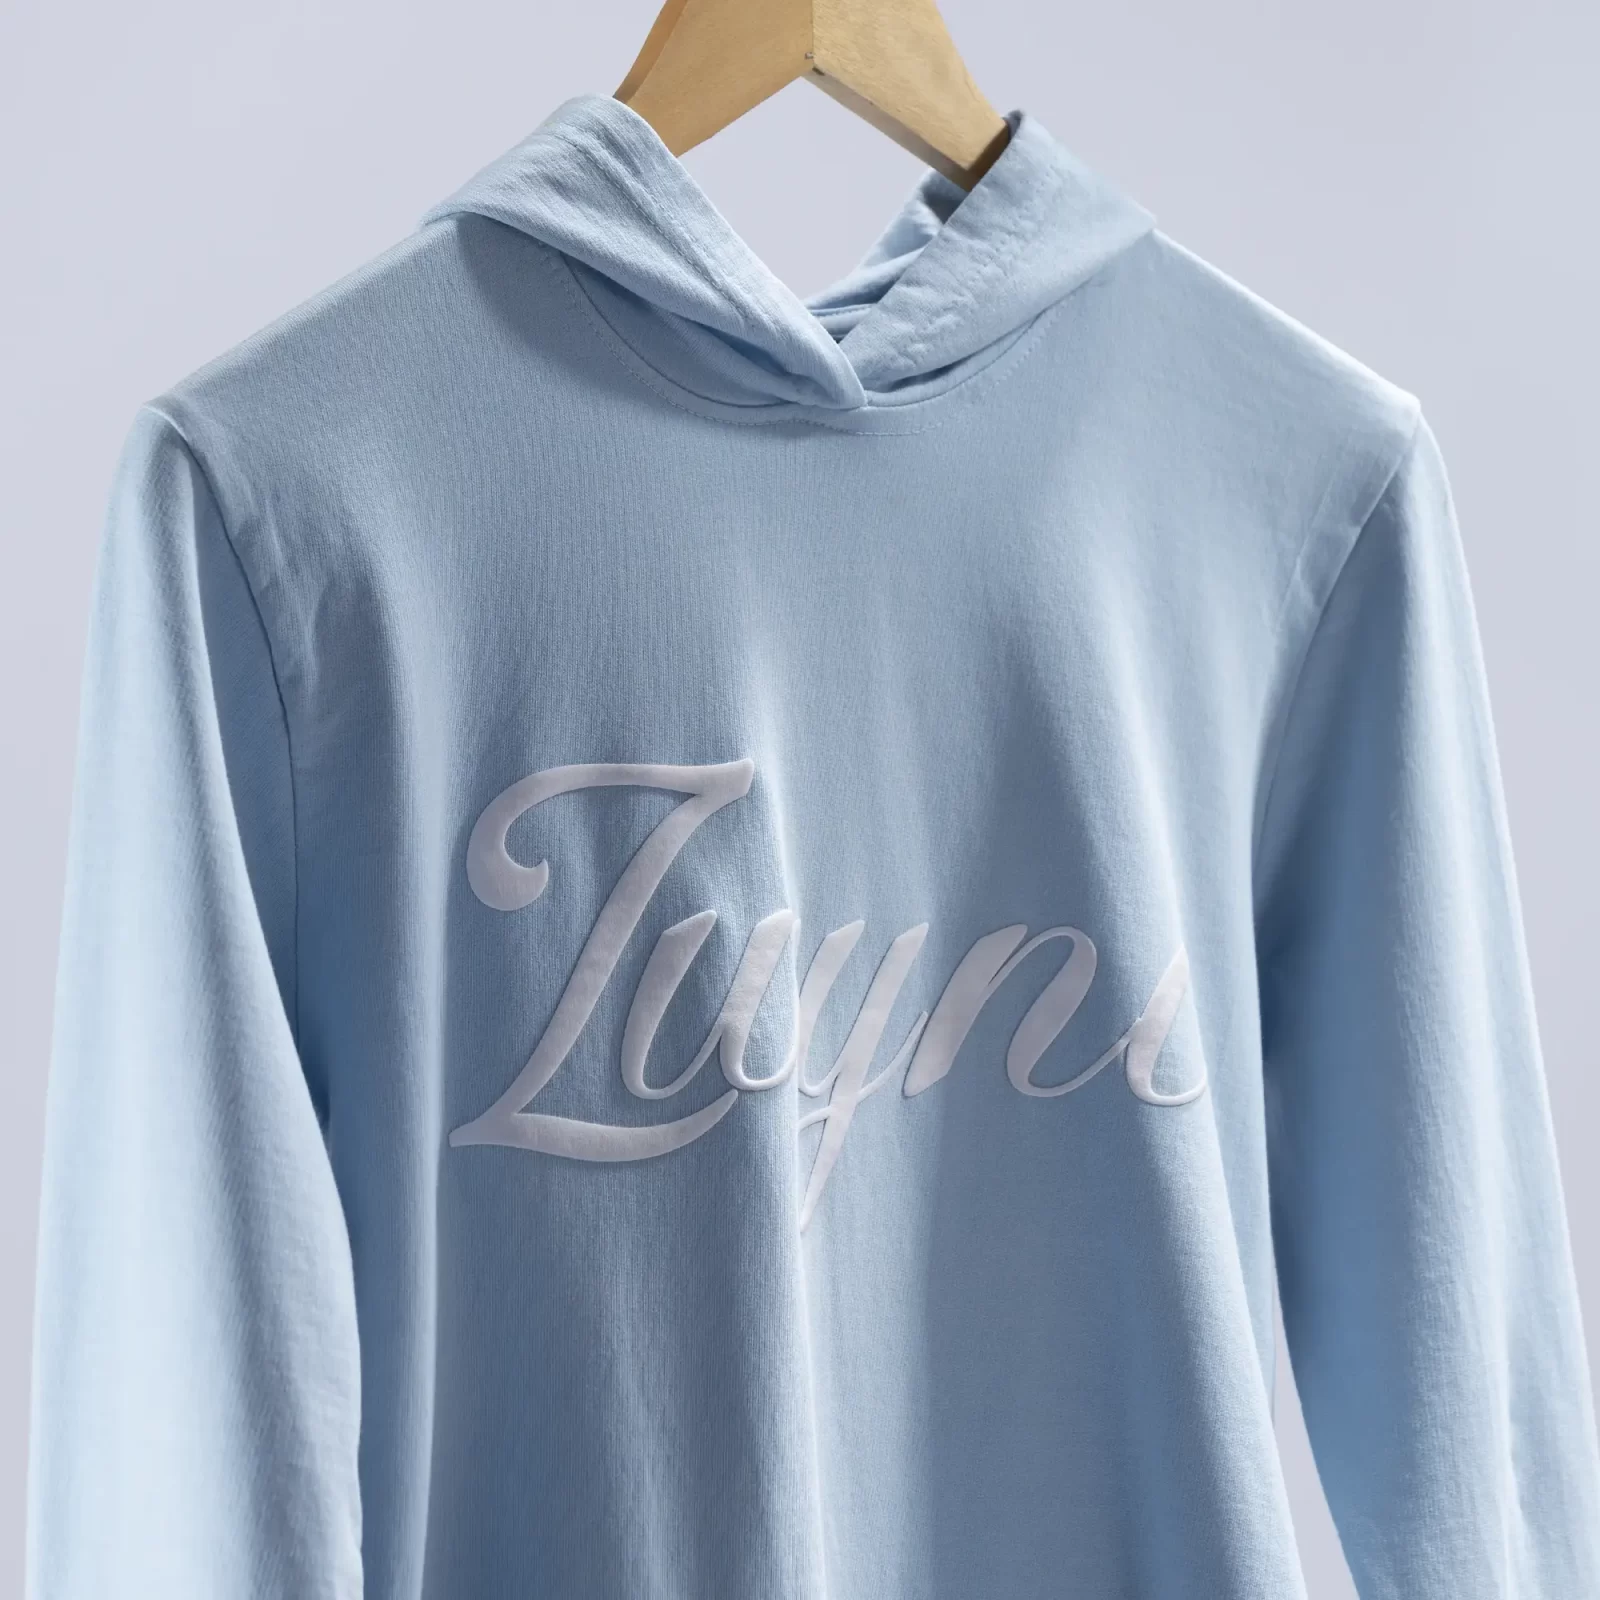 Starry Blue Hoodie for women, Best Hoodies For men and Women in Bangalore